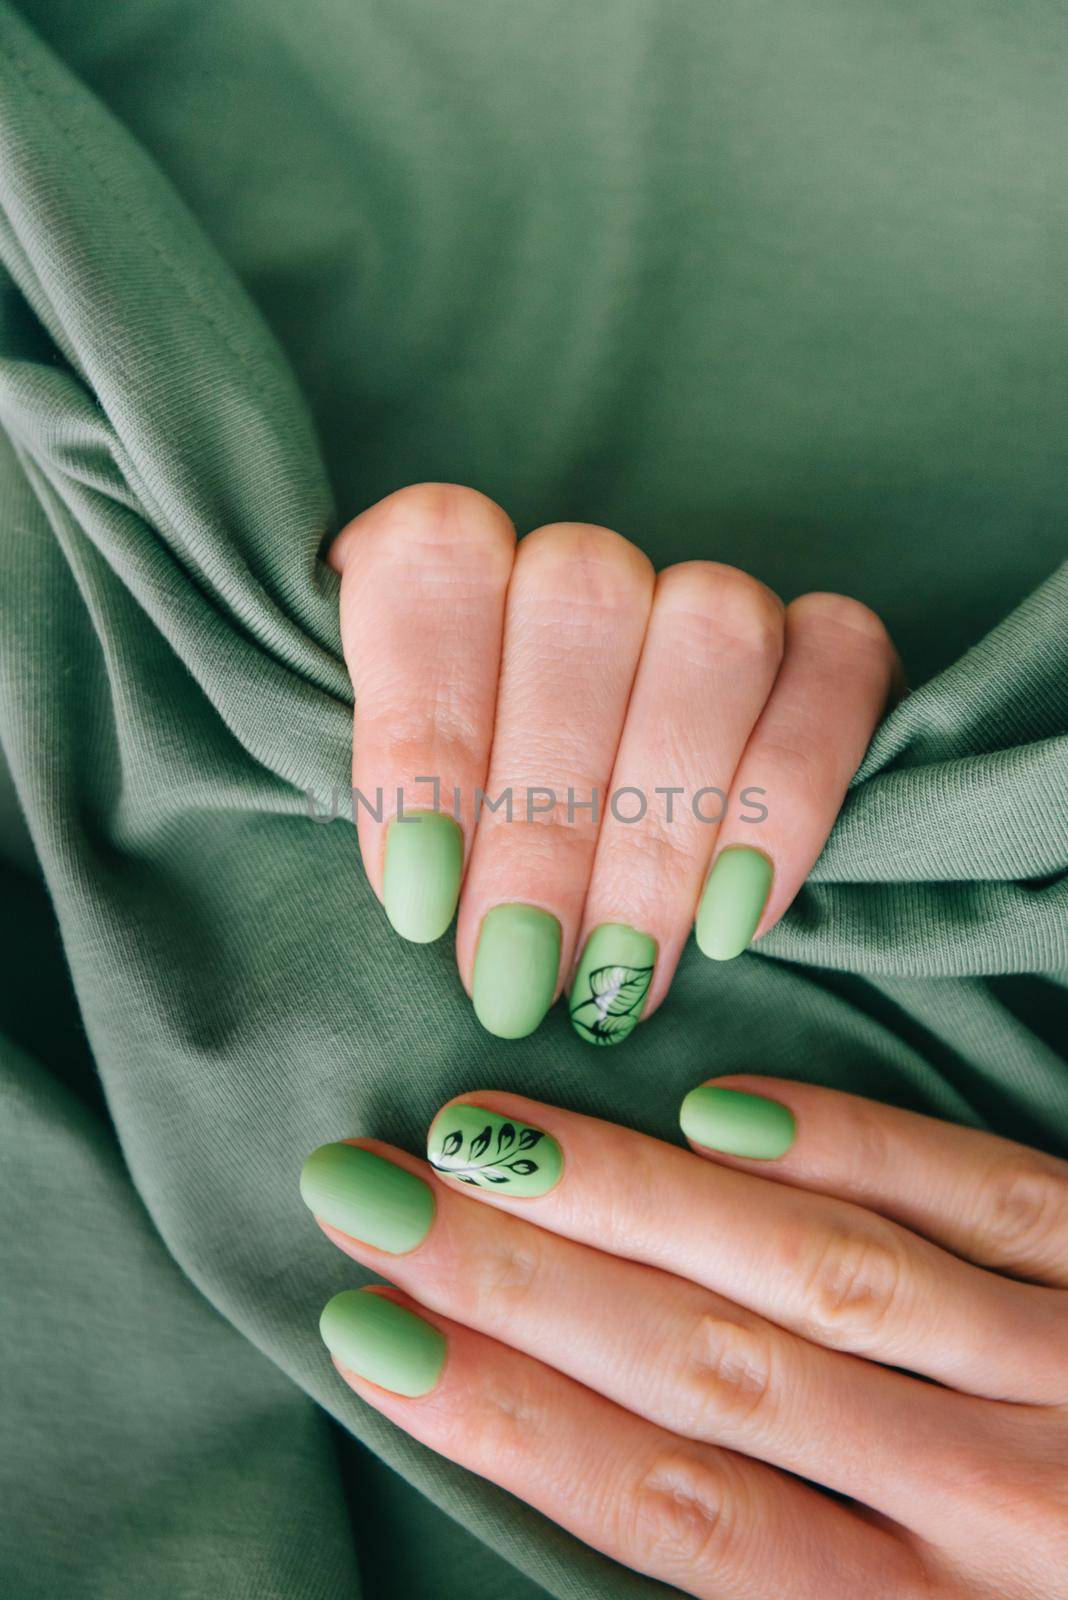 Female hands with art nails design and summer style manicure of green color on cotton fabric background.